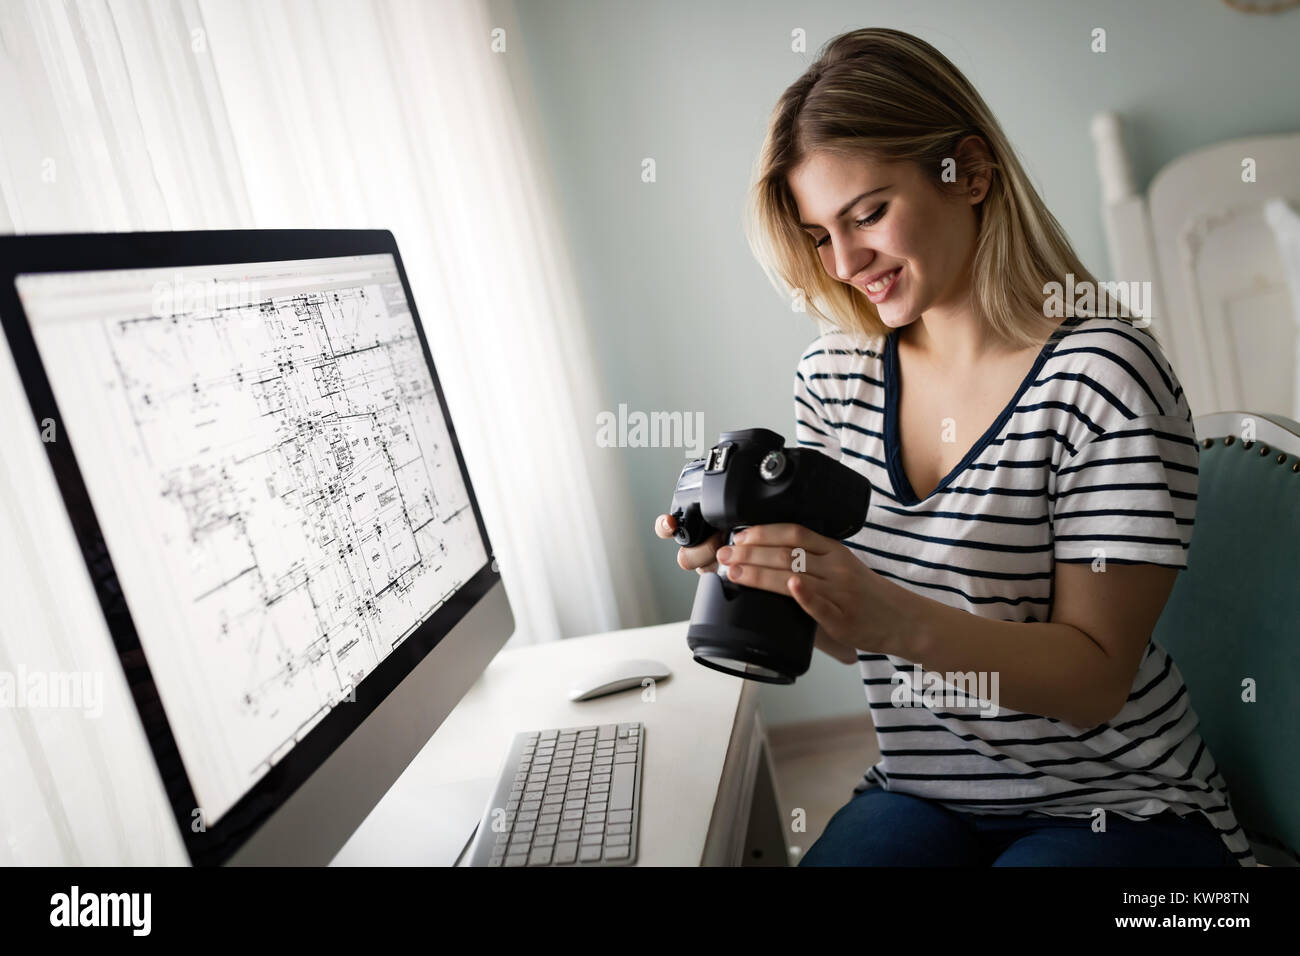 Portrait of young woman designing at home Stock Photo